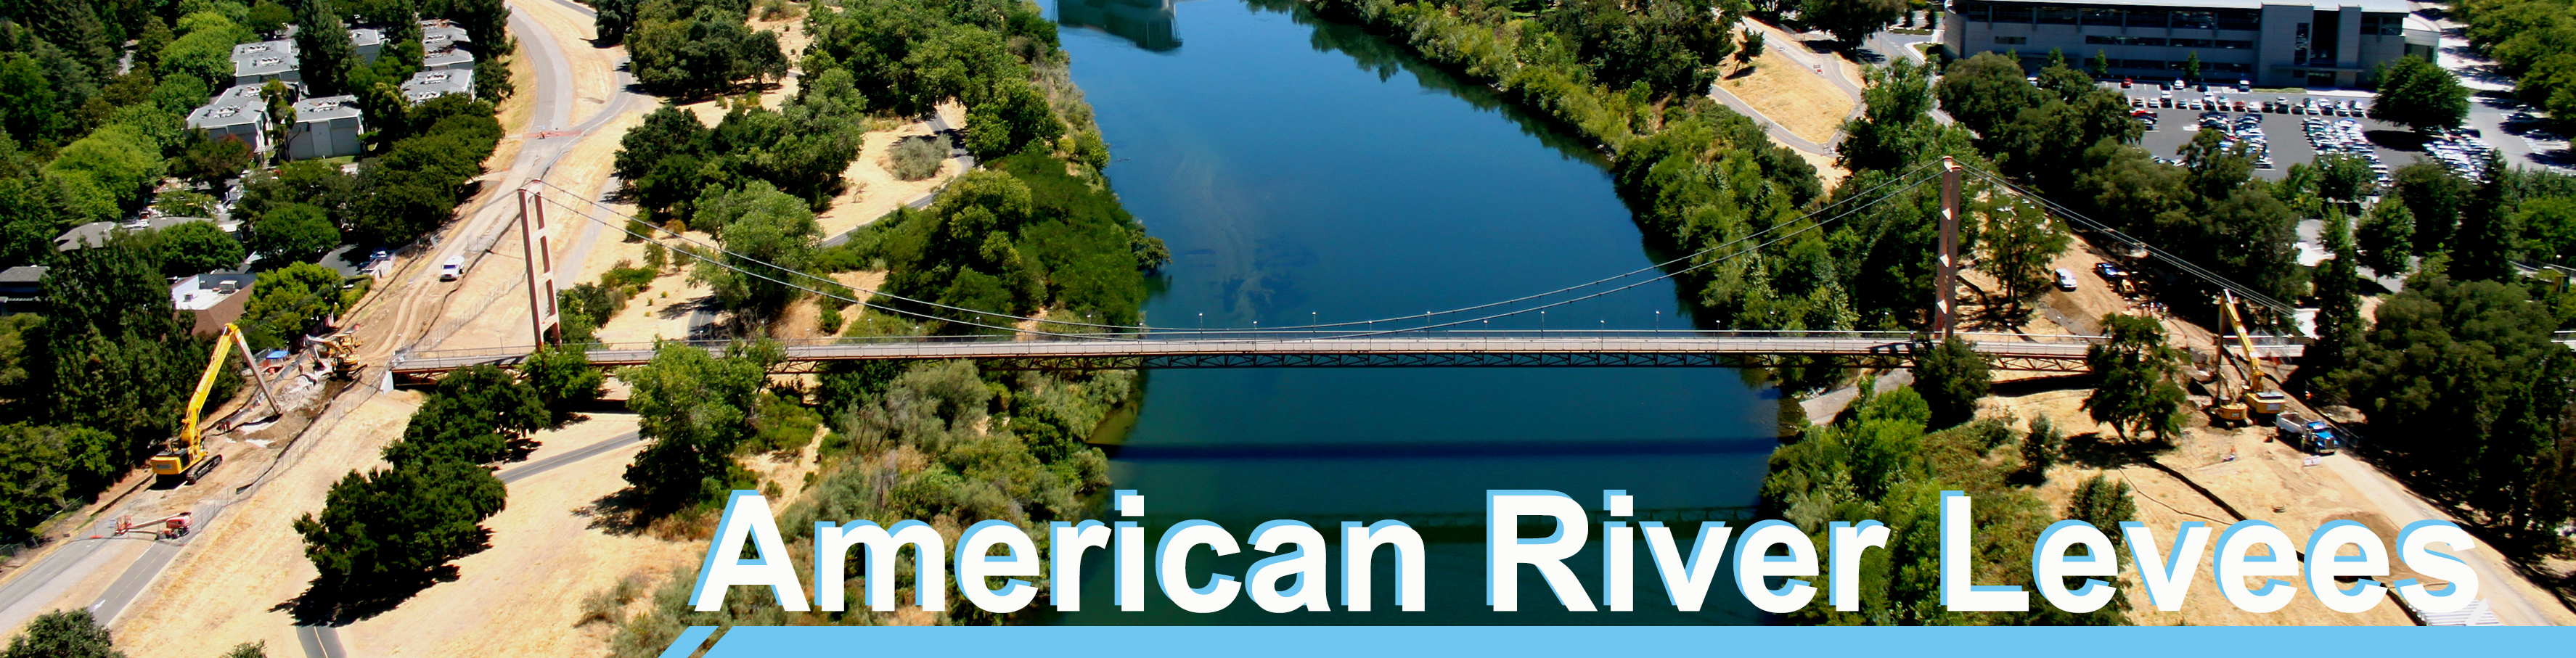 Banner - American River Levees